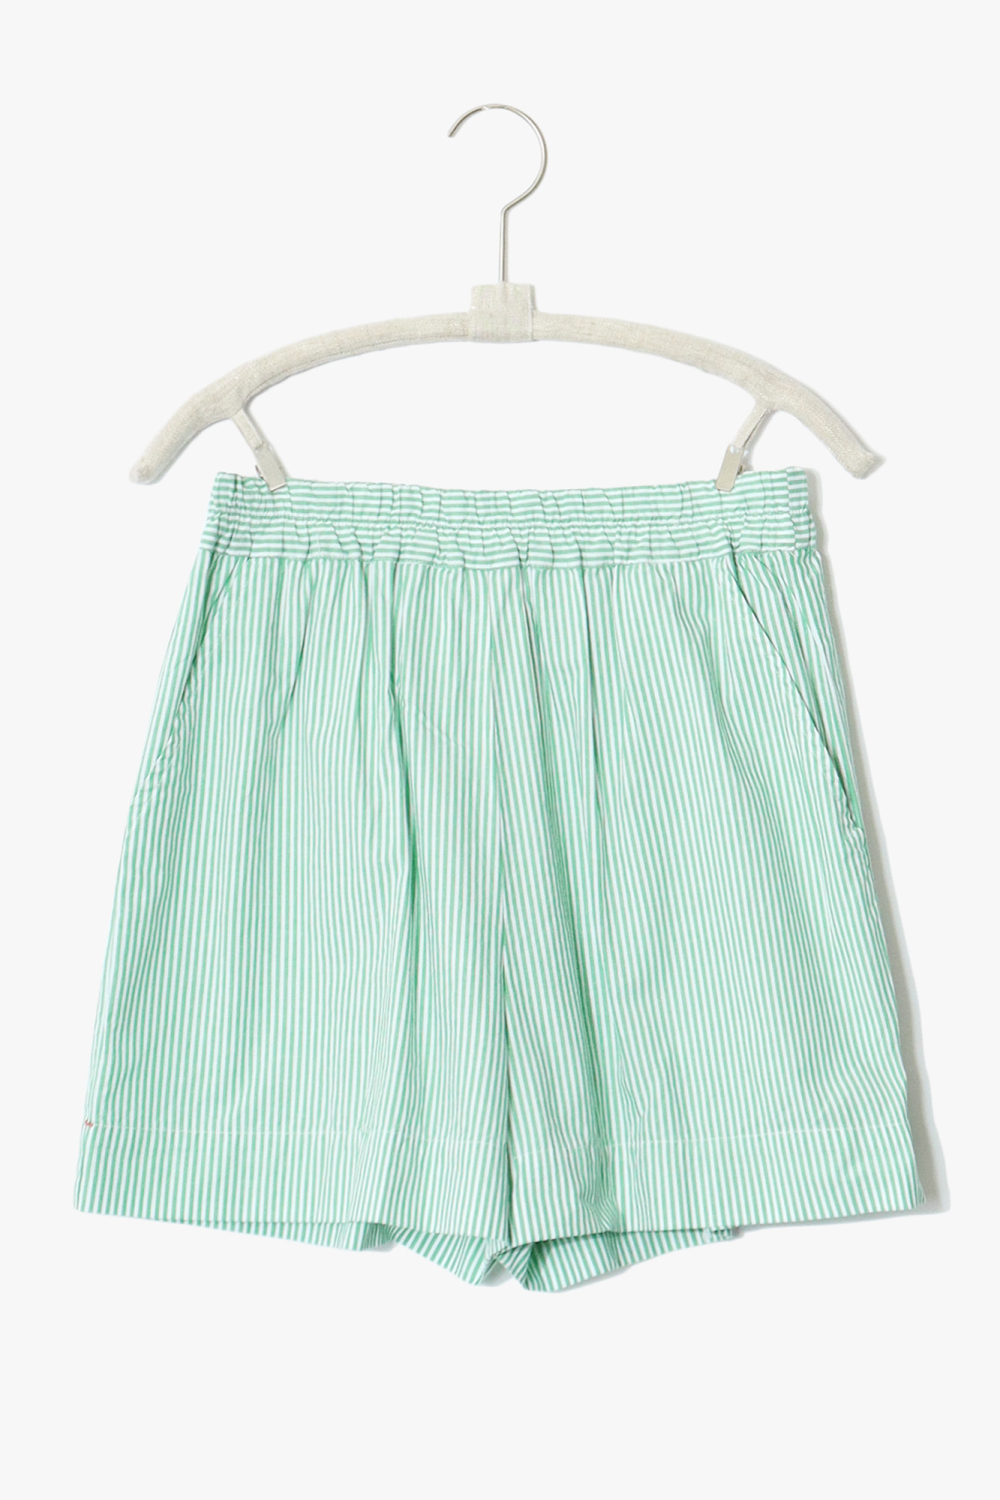 The Caysen shorts from Xirena are a must-have addition to any summer wardrobe, crafted from our signature crisp cotton pencil stripe fabric.